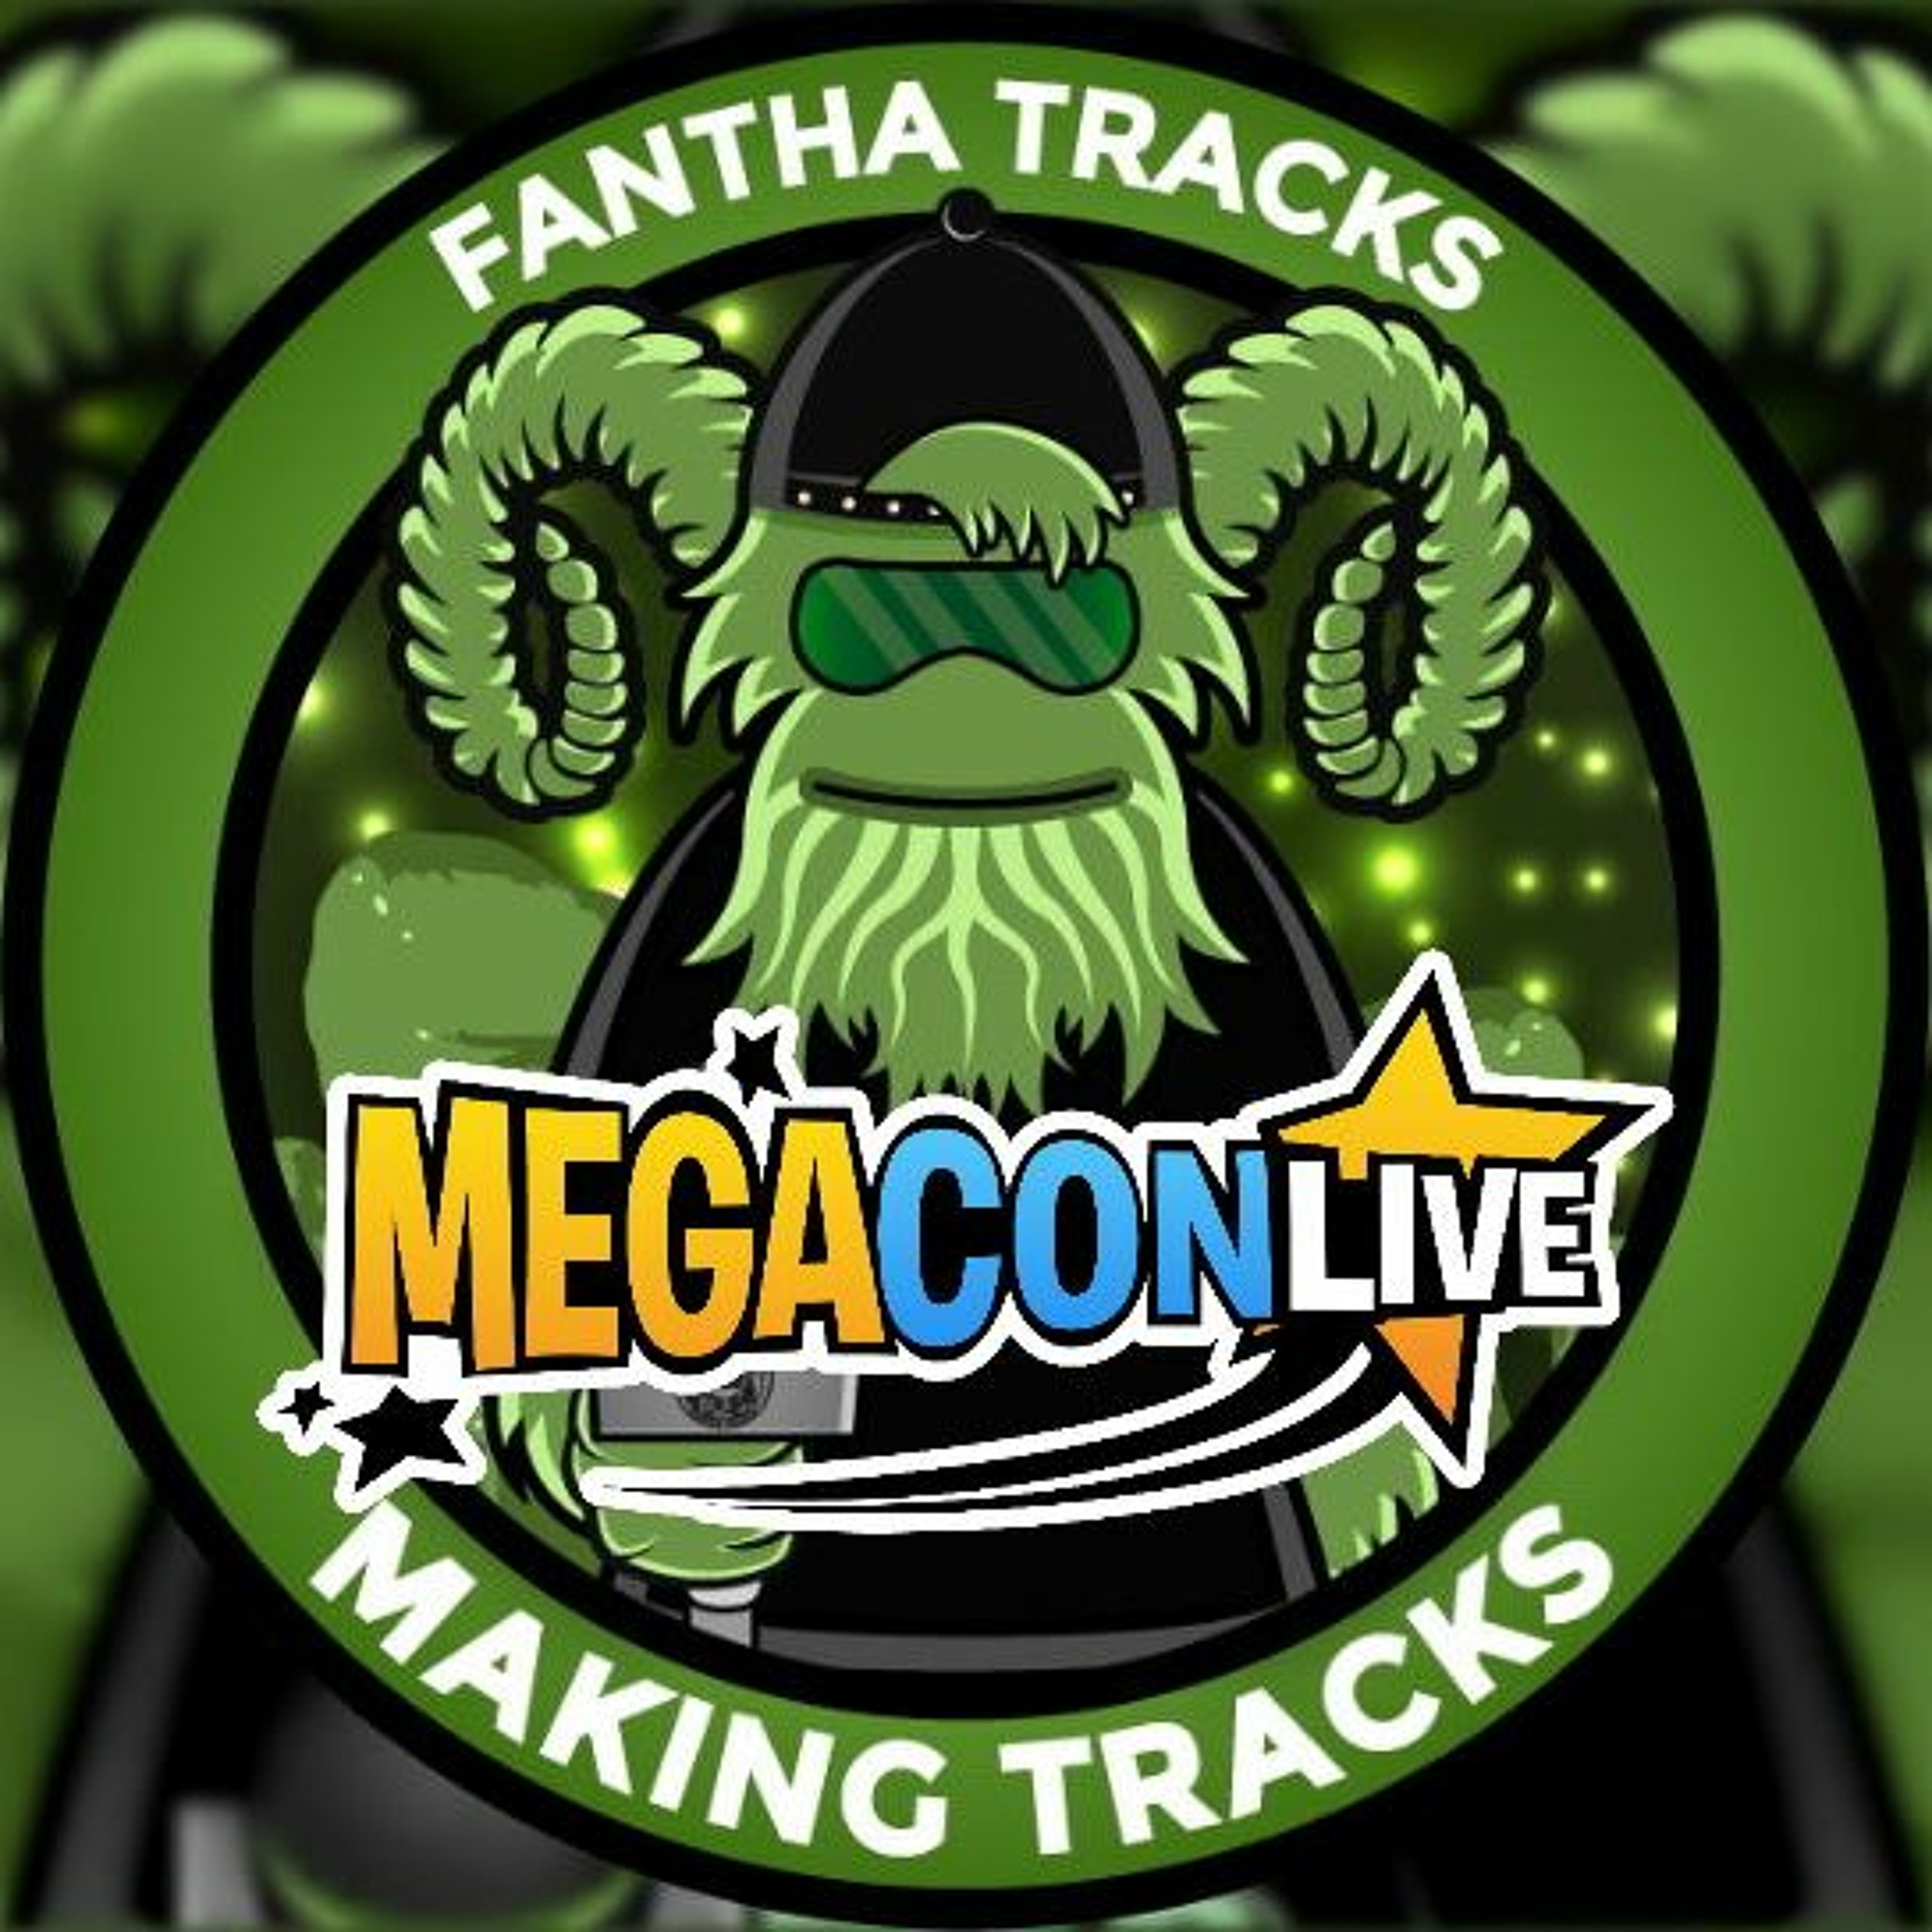 Making Tracks Episode 188: Megacon Birmingham: With guests Marc Thompson and Michael Cullen